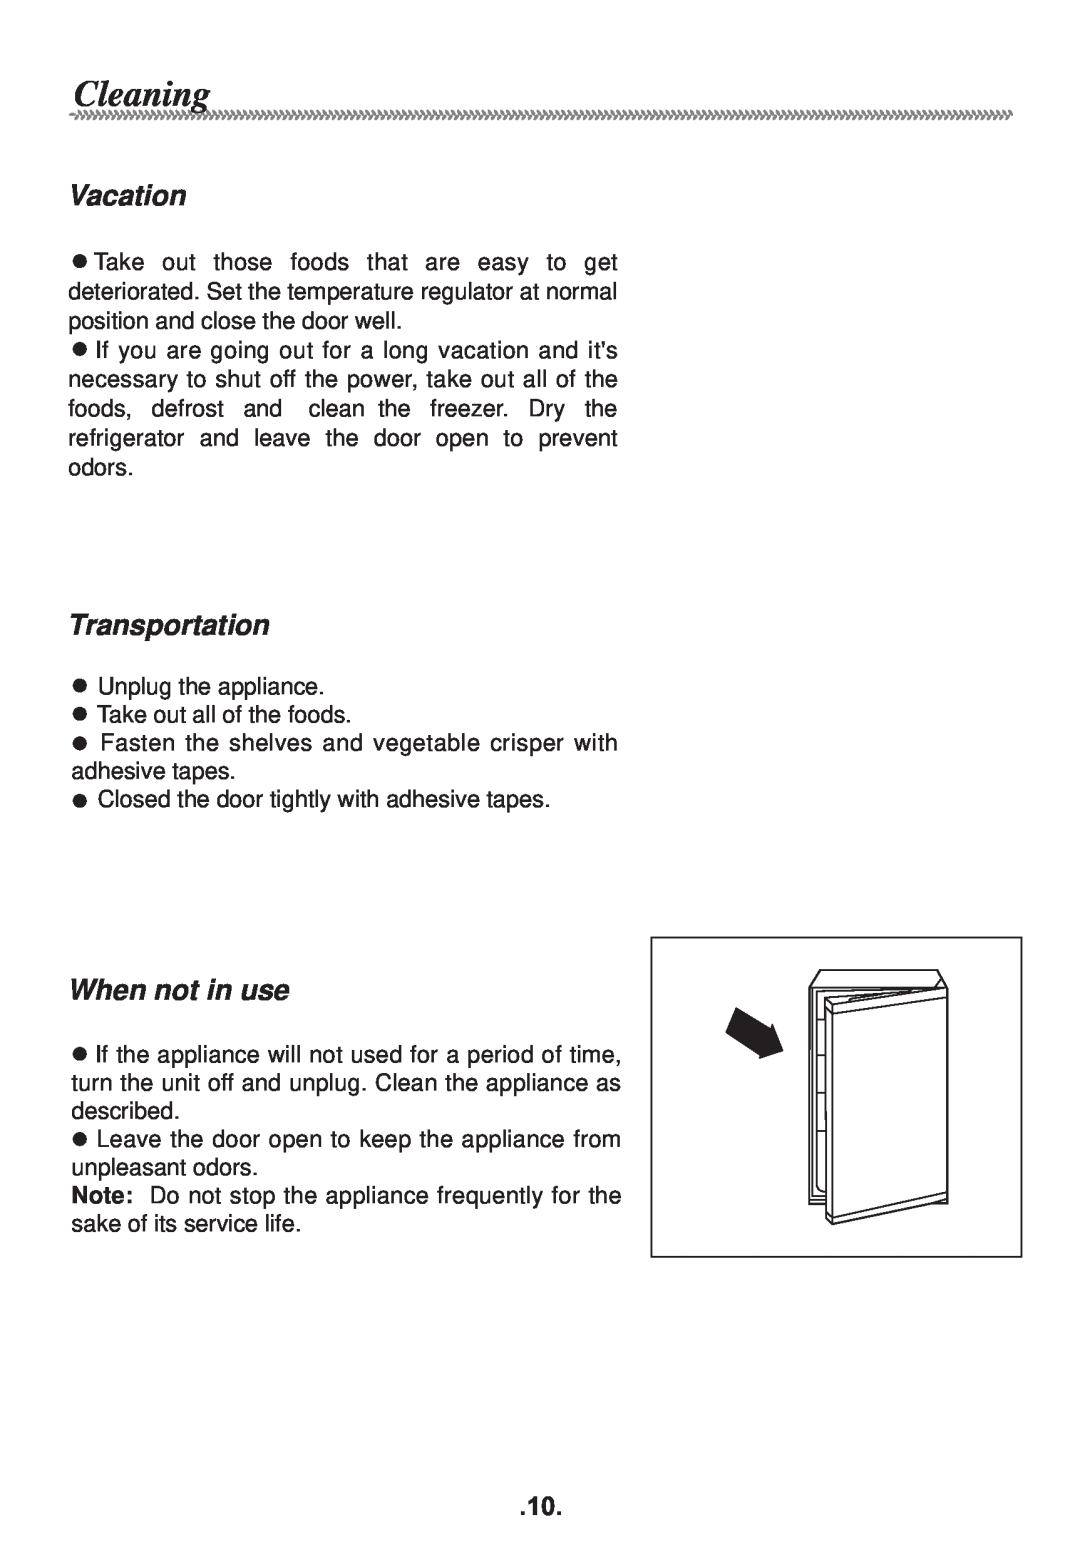 Haier HR-138AR manual Cleaning, Vacation, Transportation, When not in use 